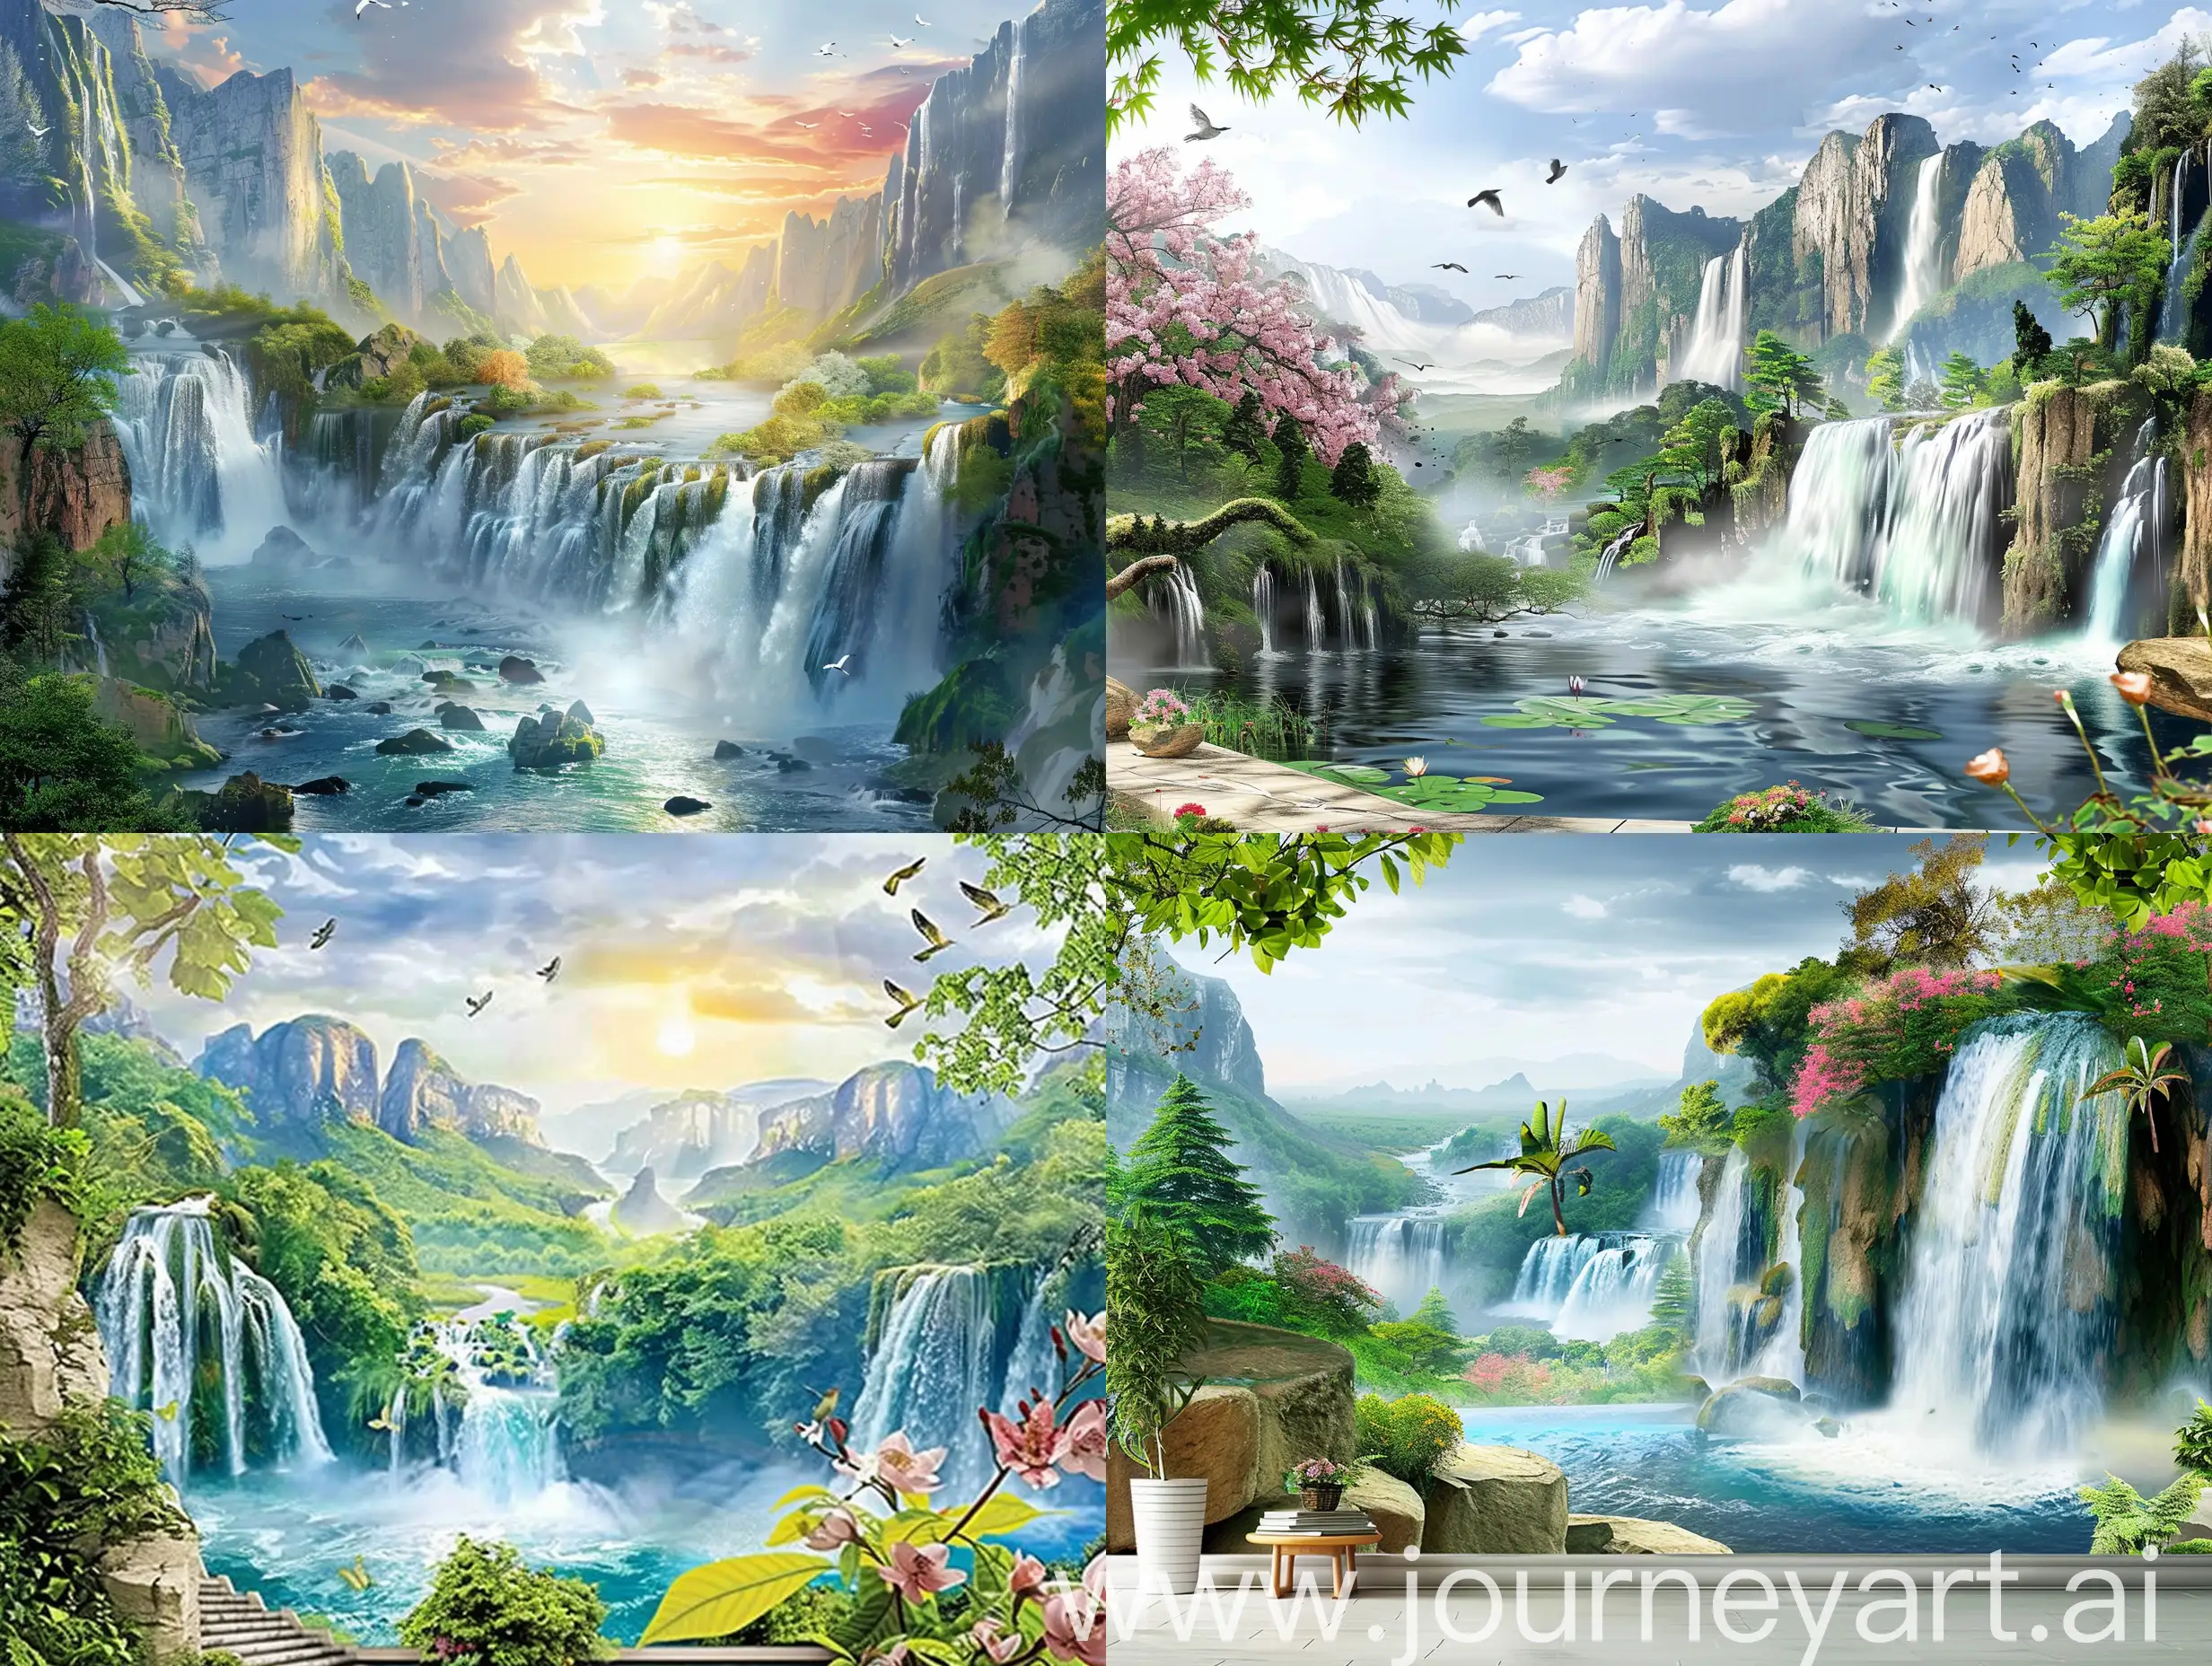 3D mural paintings, natural landscapes, waterfalls and nature, realistic, 4K quality, energy colors, modern